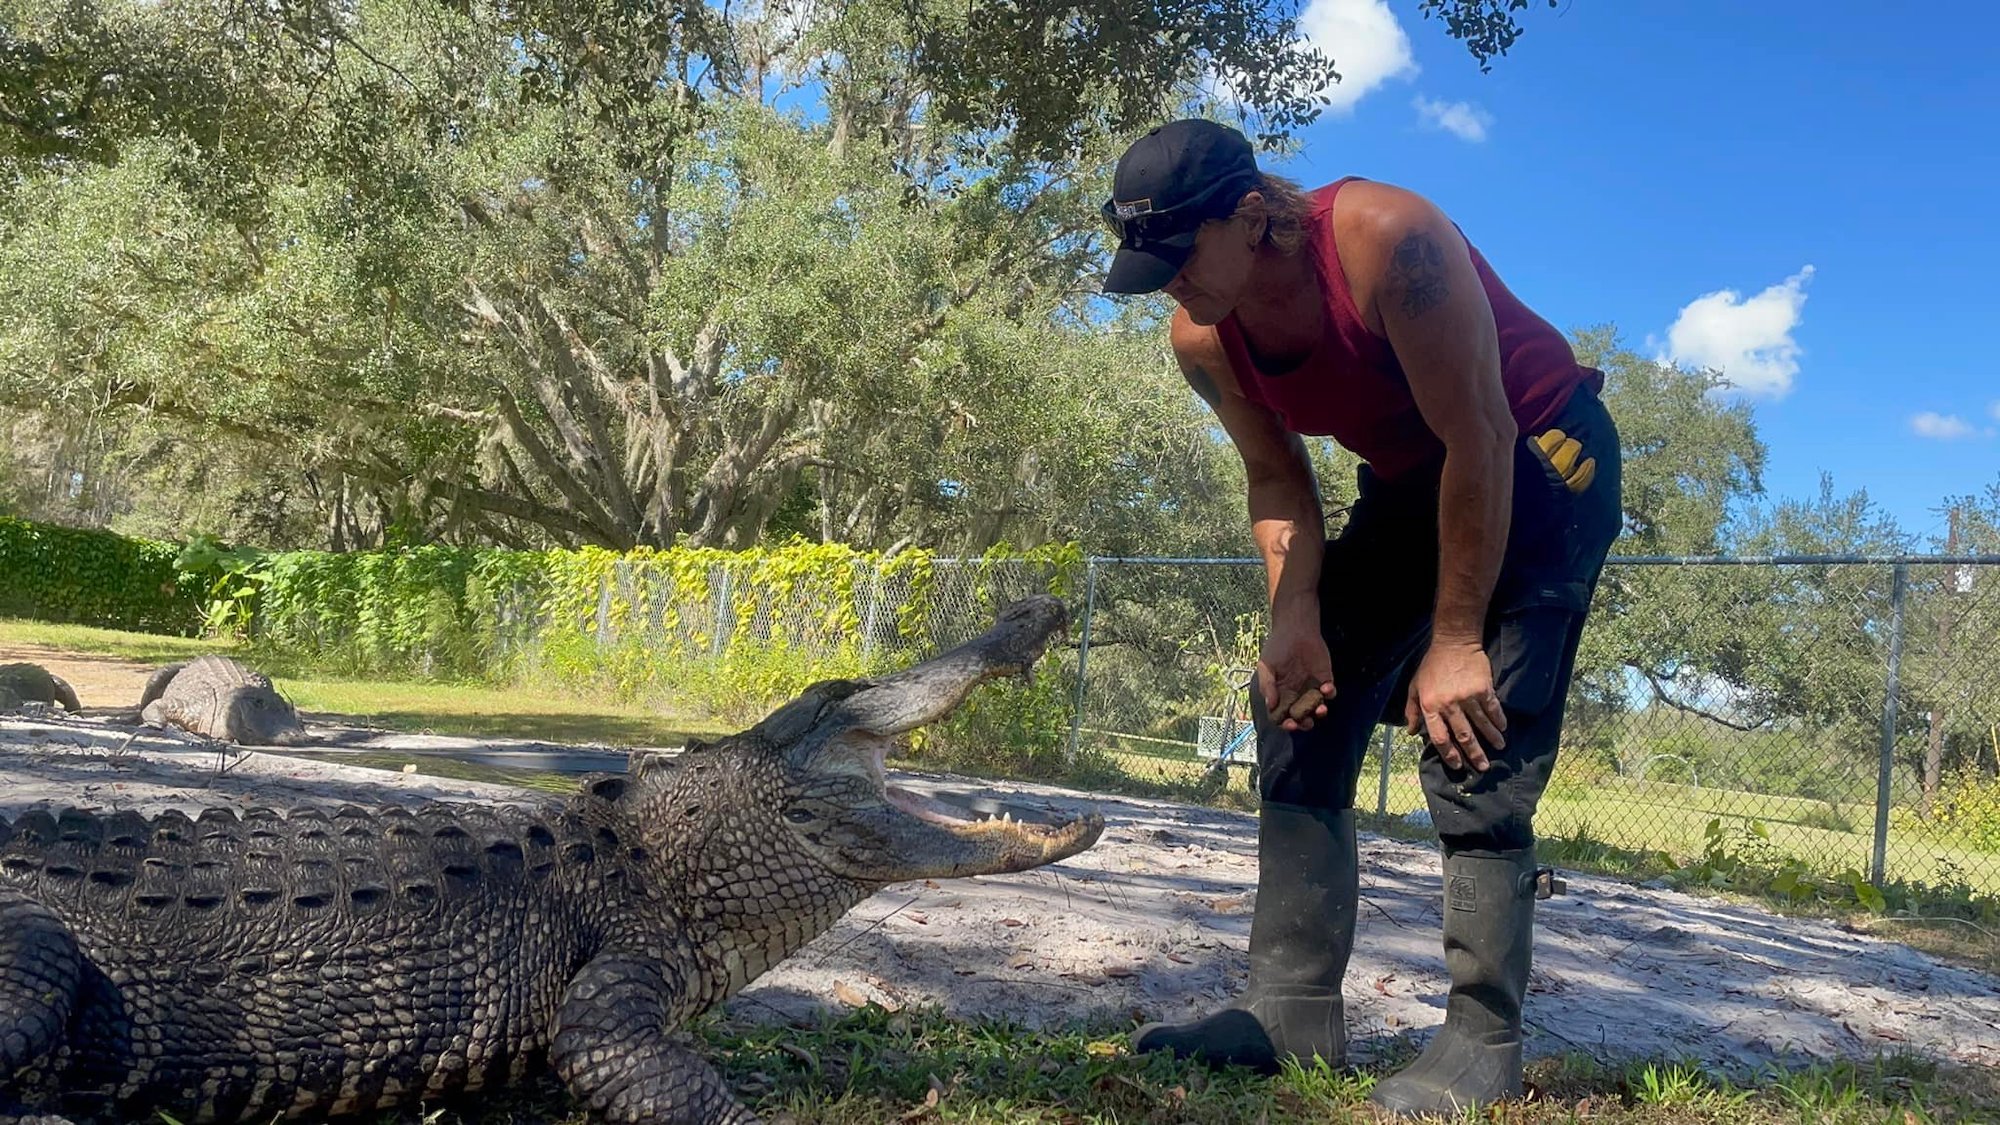 Director of Florida Wildlife Park Loses Hand After Being Attacked by an Alligator